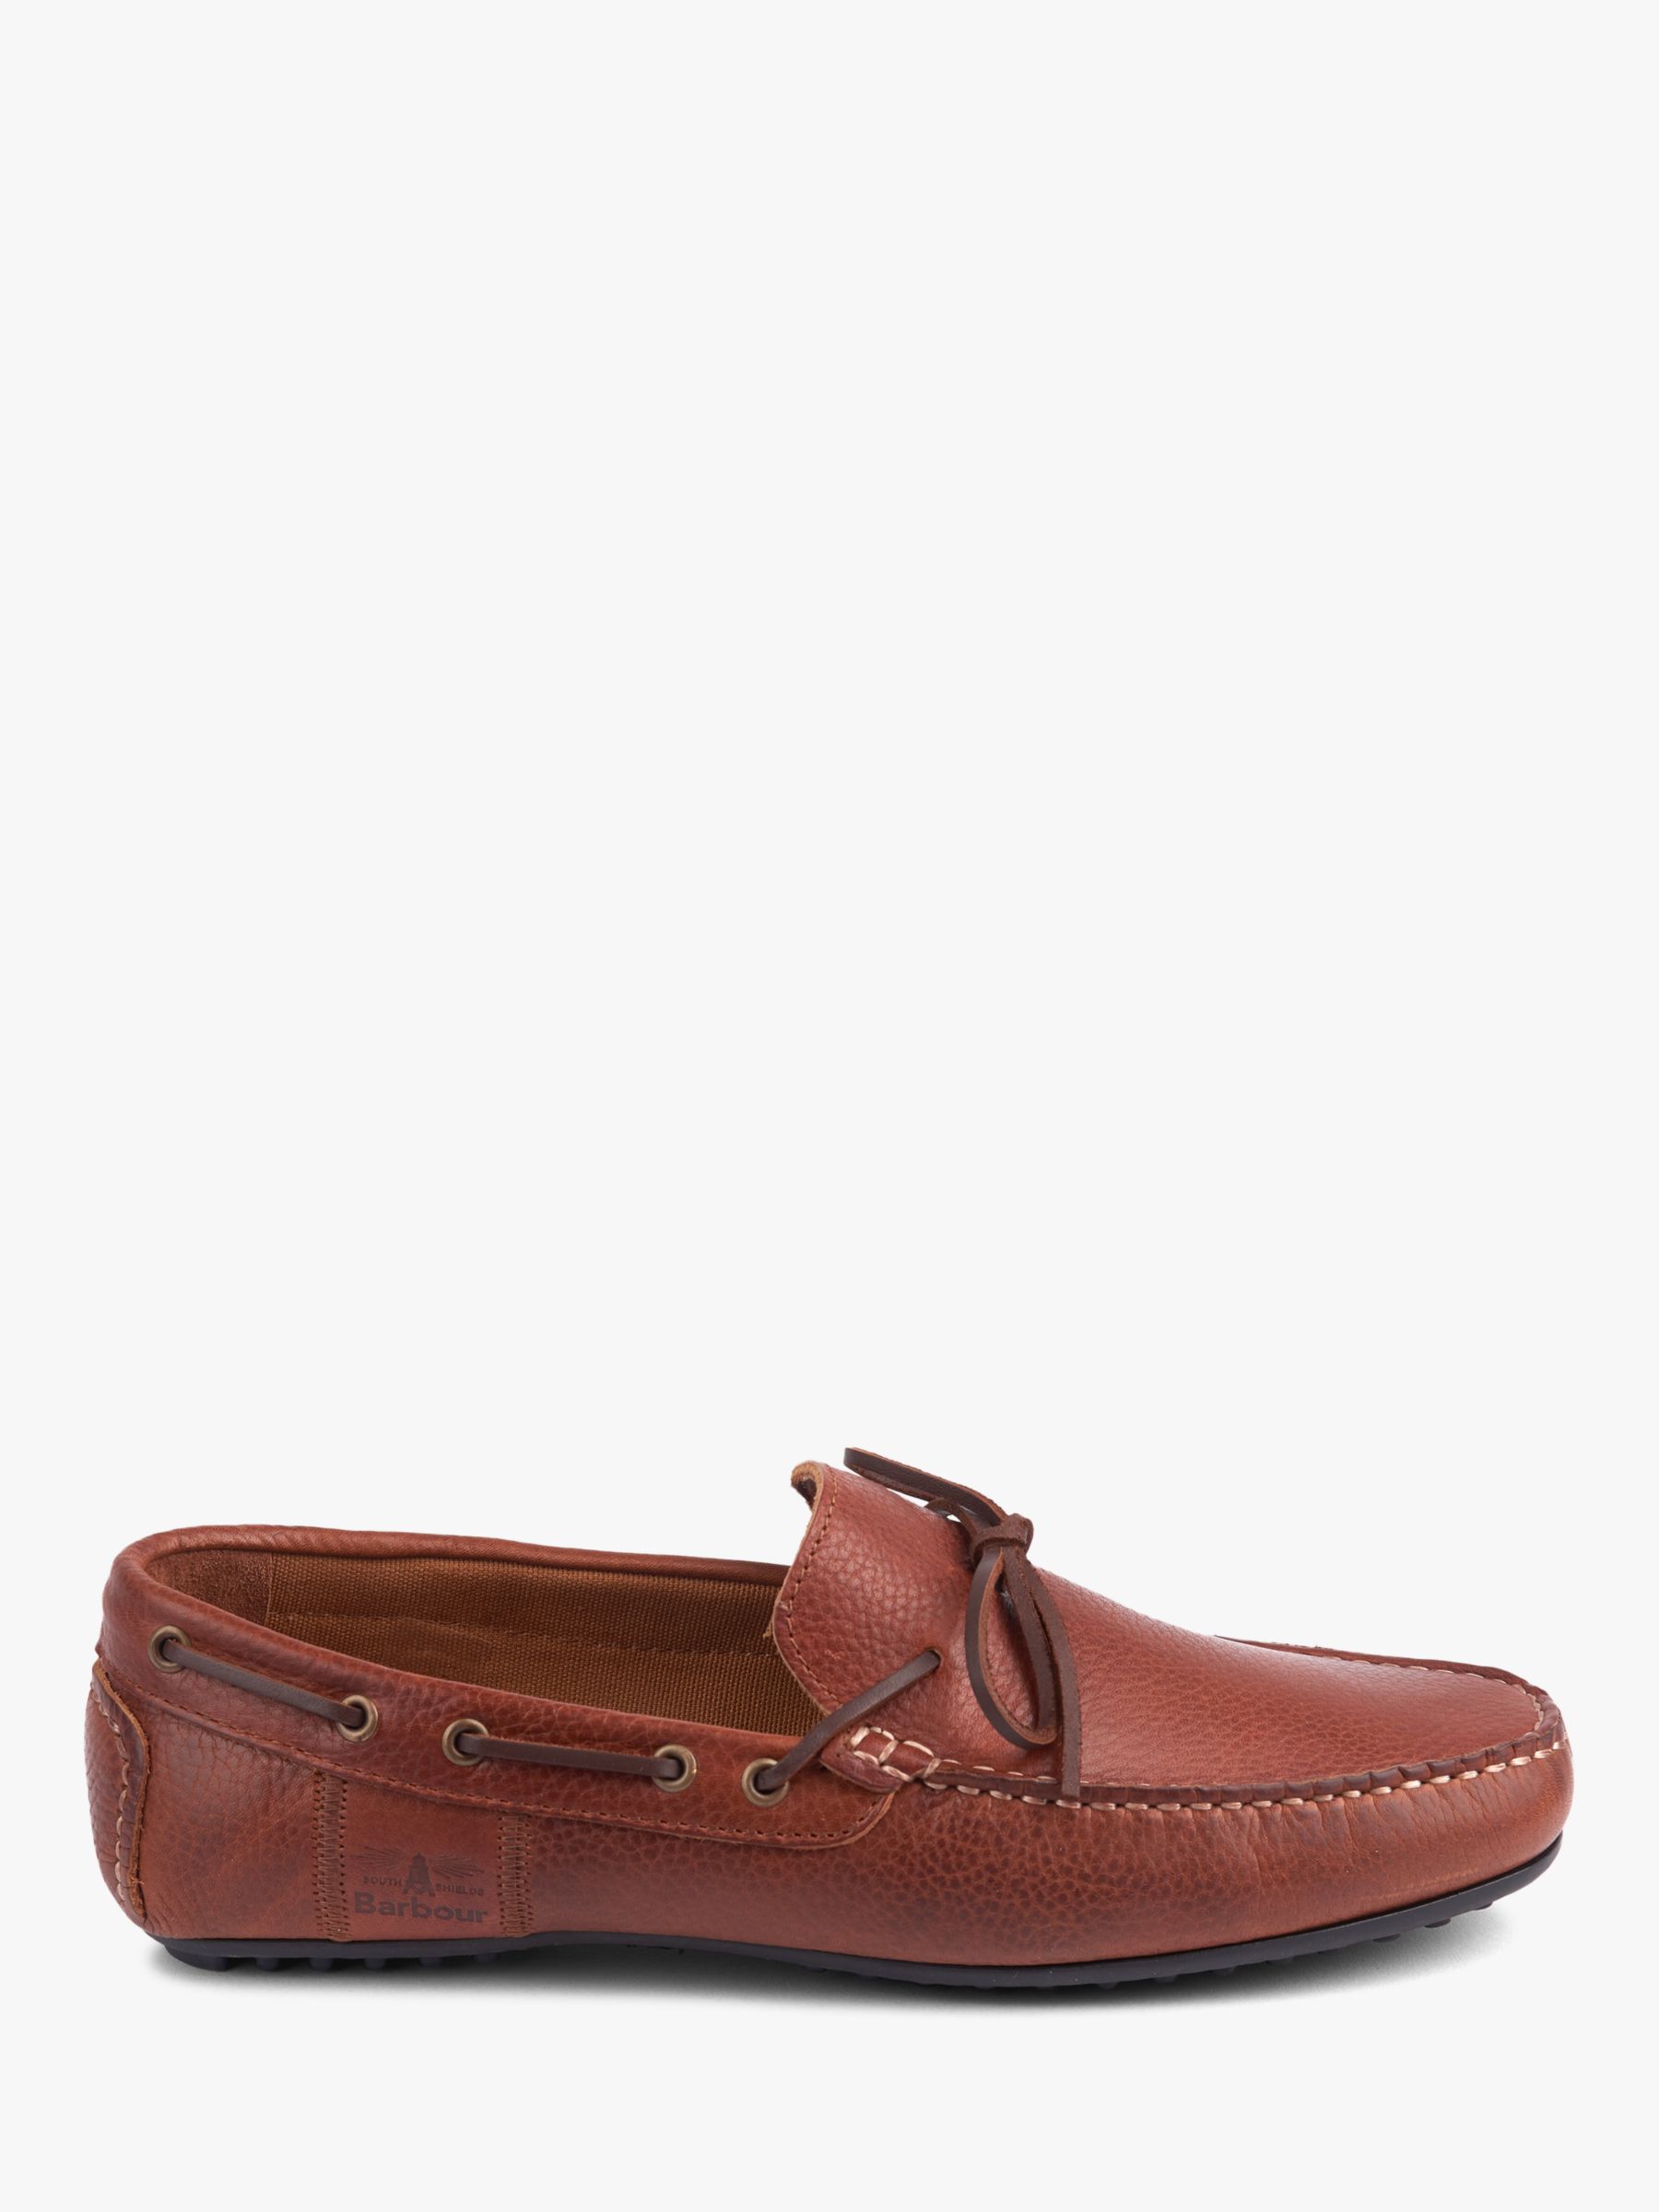 Barbour Eldon Leather Penny Driver Loafers, Tan